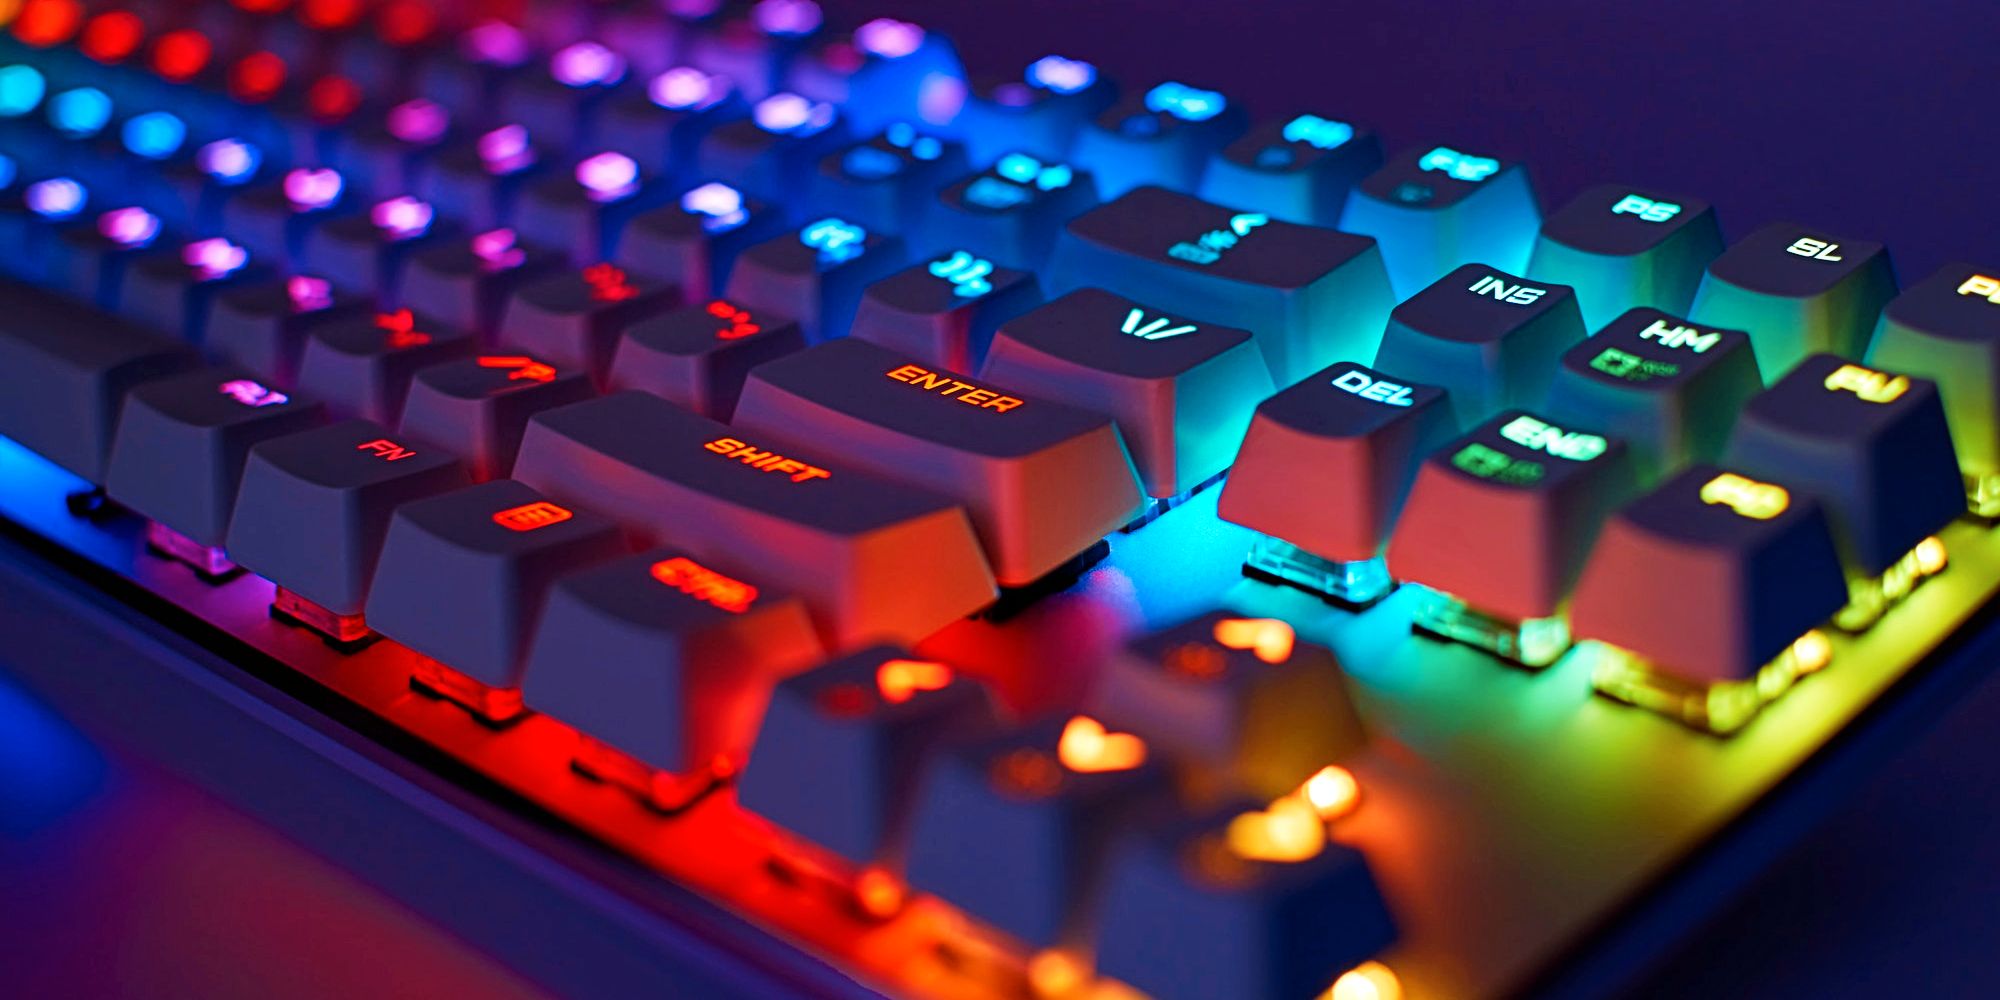 6 Things You Need to Know When Choosing a Mechanical Keyboard